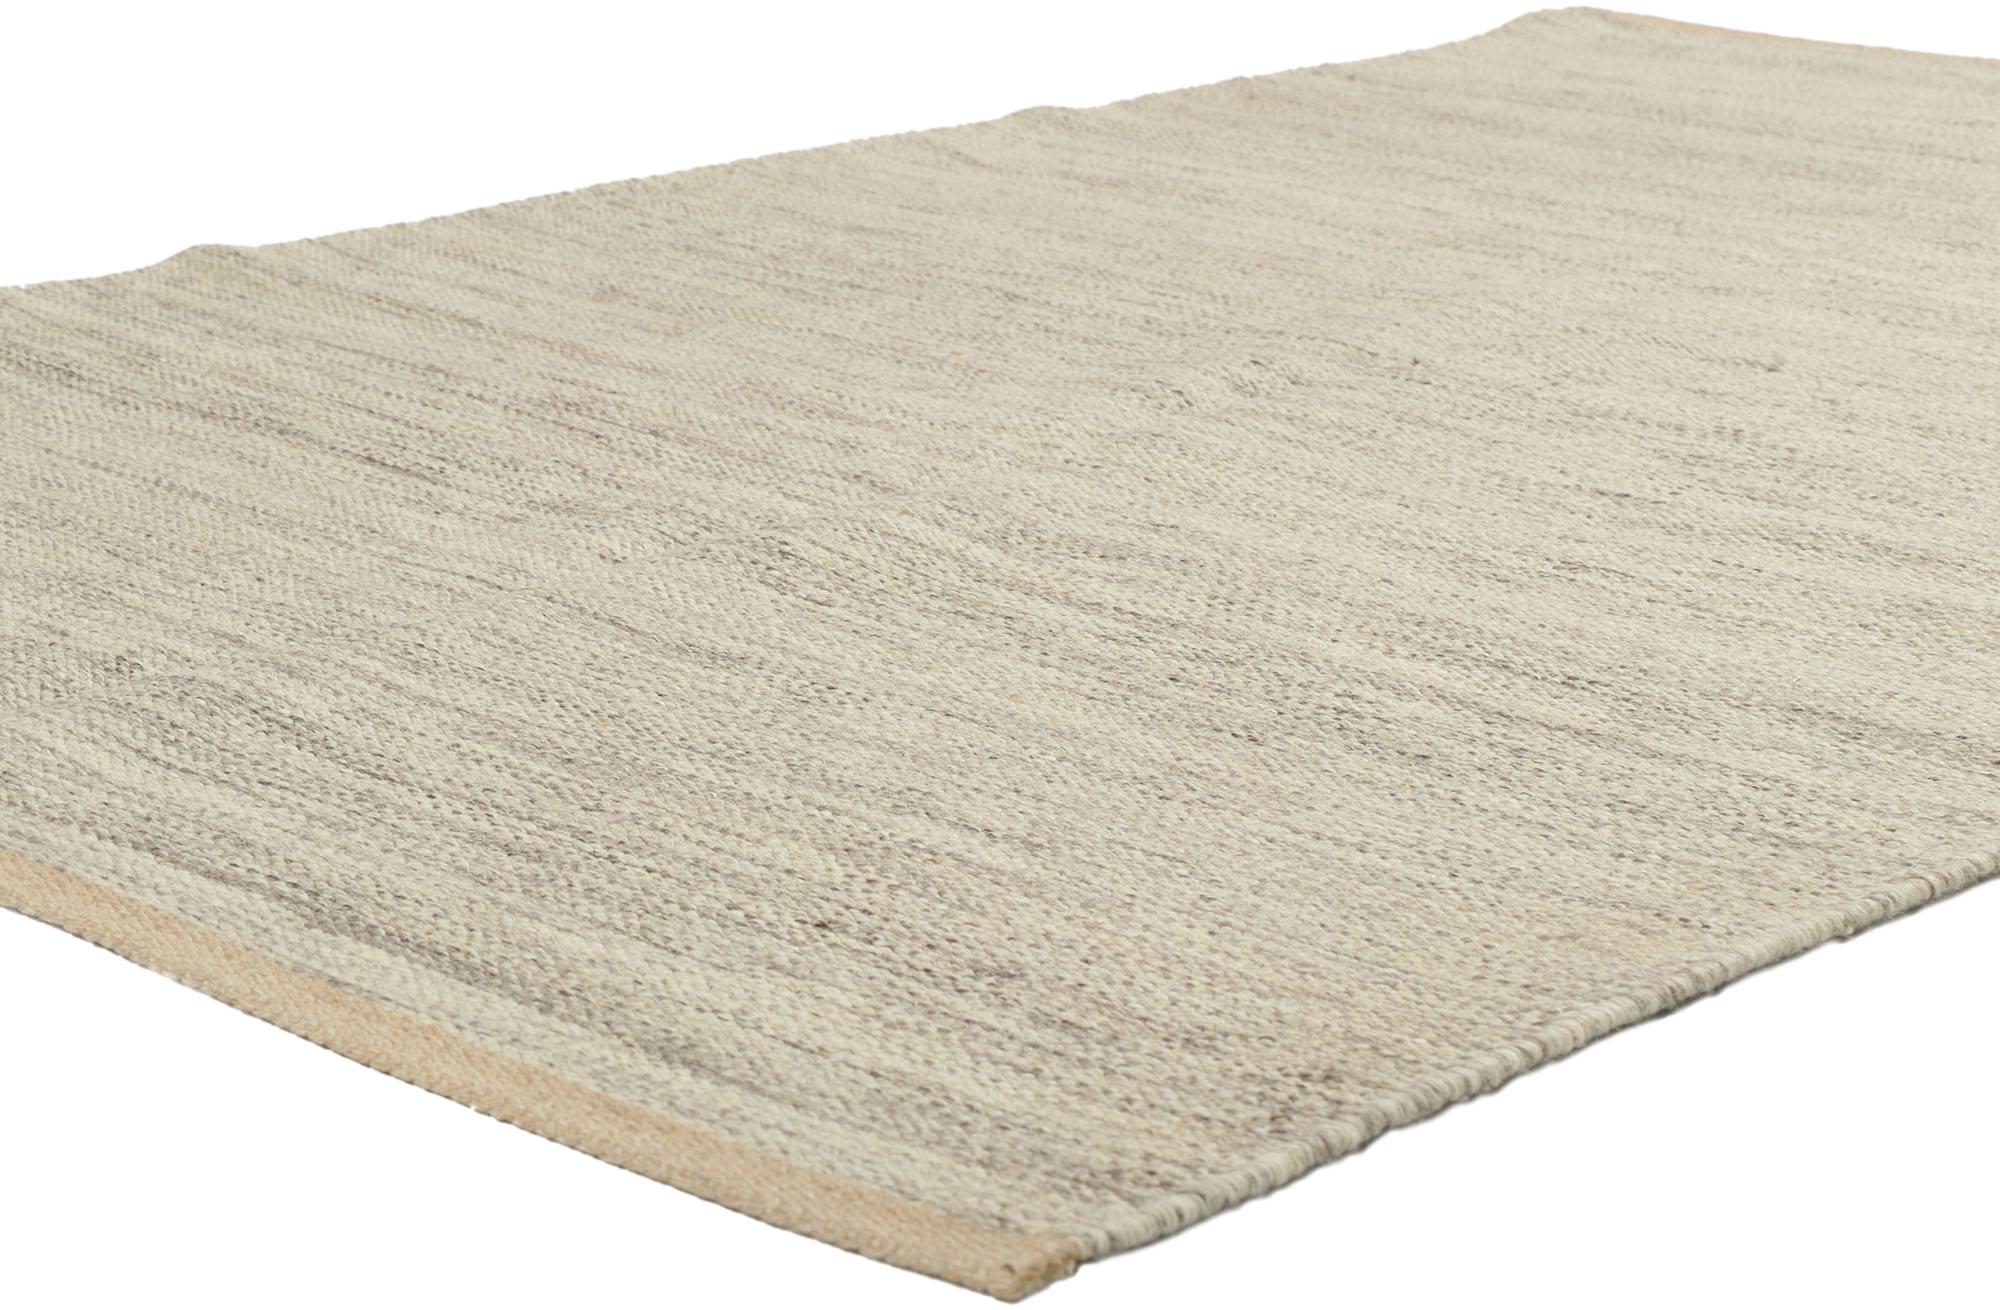 30698 New Swedish Inspired Kilim rug with Minimalist Scandinavian Modern Style 05'02 x 08'00. Warm and inviting with hygge vibes, this hand-woven wool Swedish inspired Kilim rug beautifully embodies the simplicity of Scandinavian modern style.